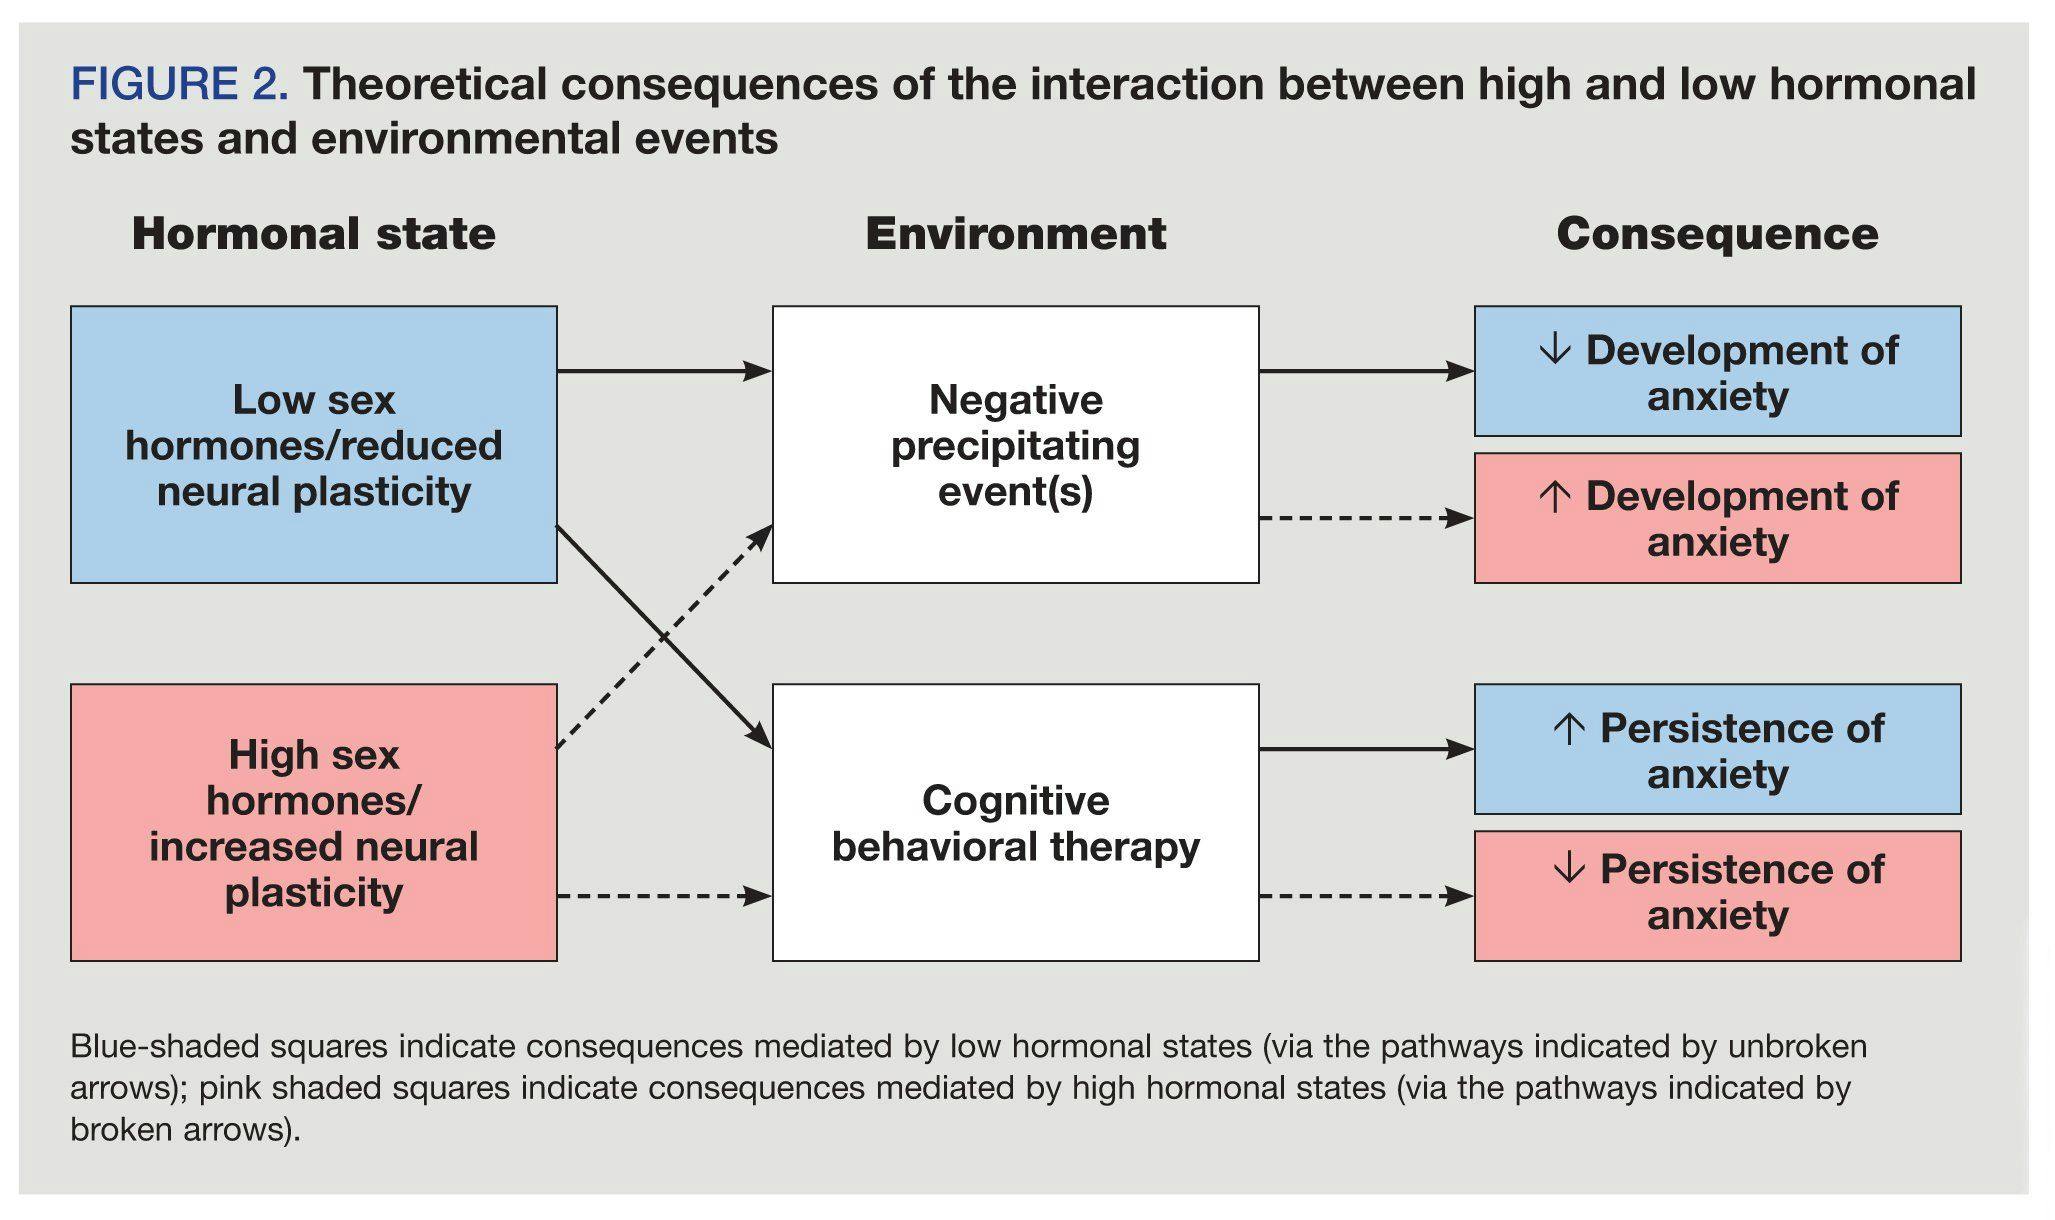 Theoretical consequences of the interaction between high and low hormonal states and environmental events